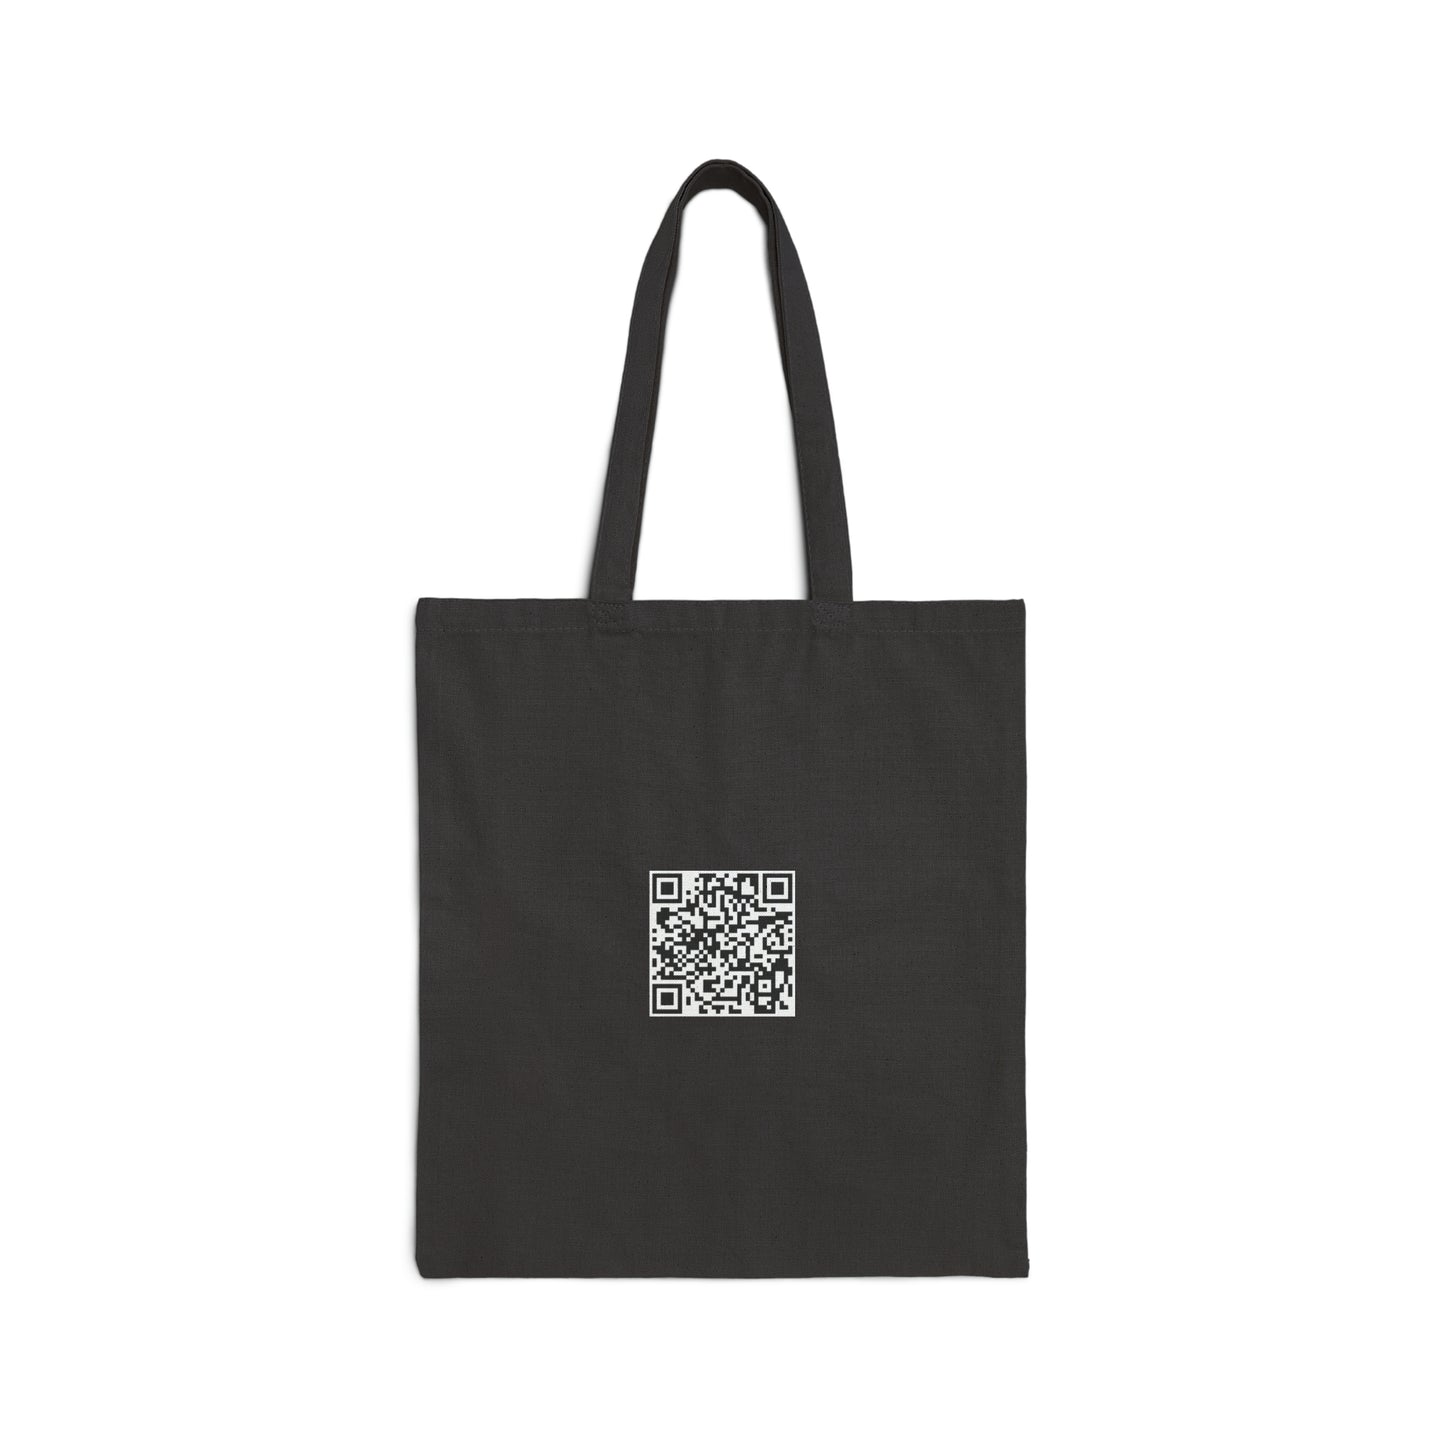 No Shelter Here - Cotton Canvas Tote Bag